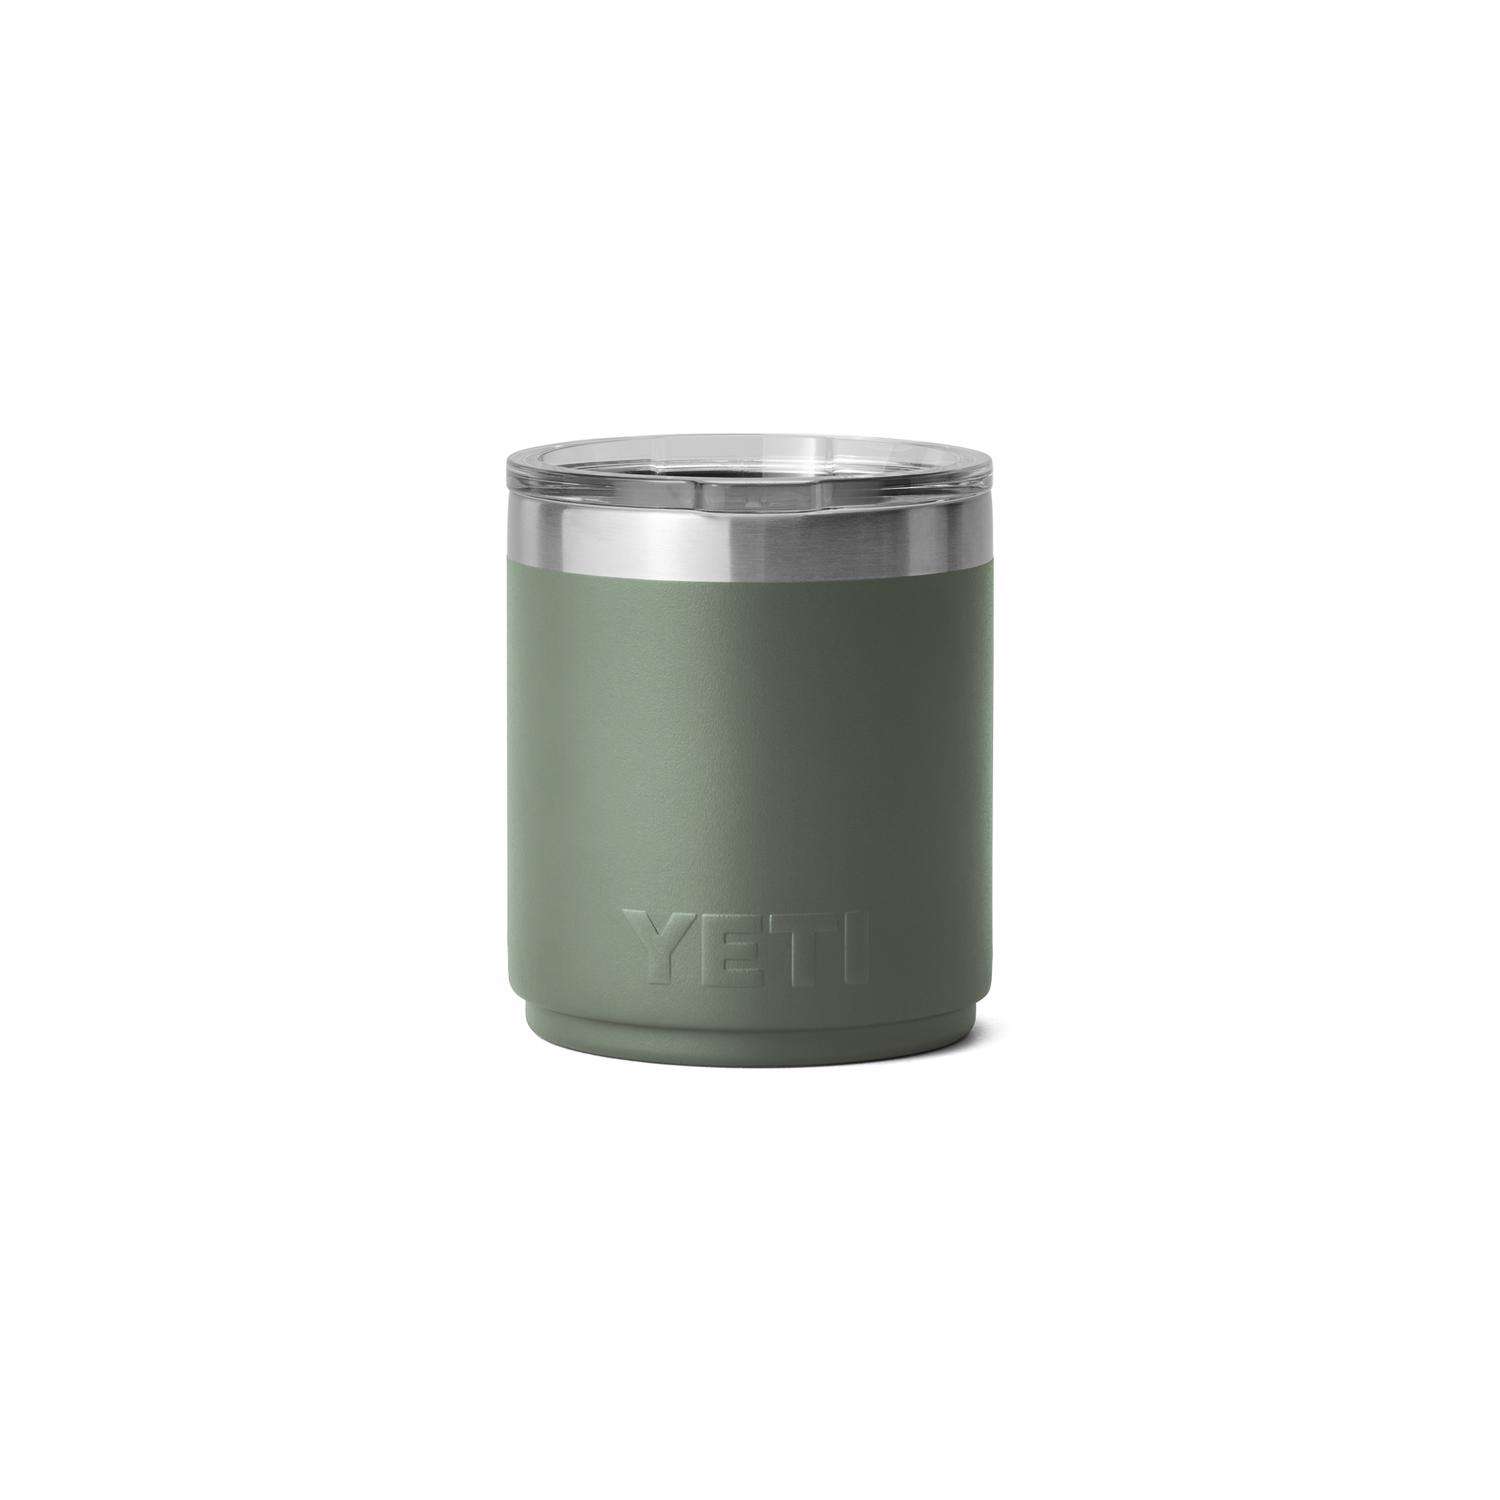 YETI Rambler 10 oz Tumbler, Stainless Steel, Vacuum Insulated  with MagSlider Lid, Camp Green: Tumblers & Water Glasses